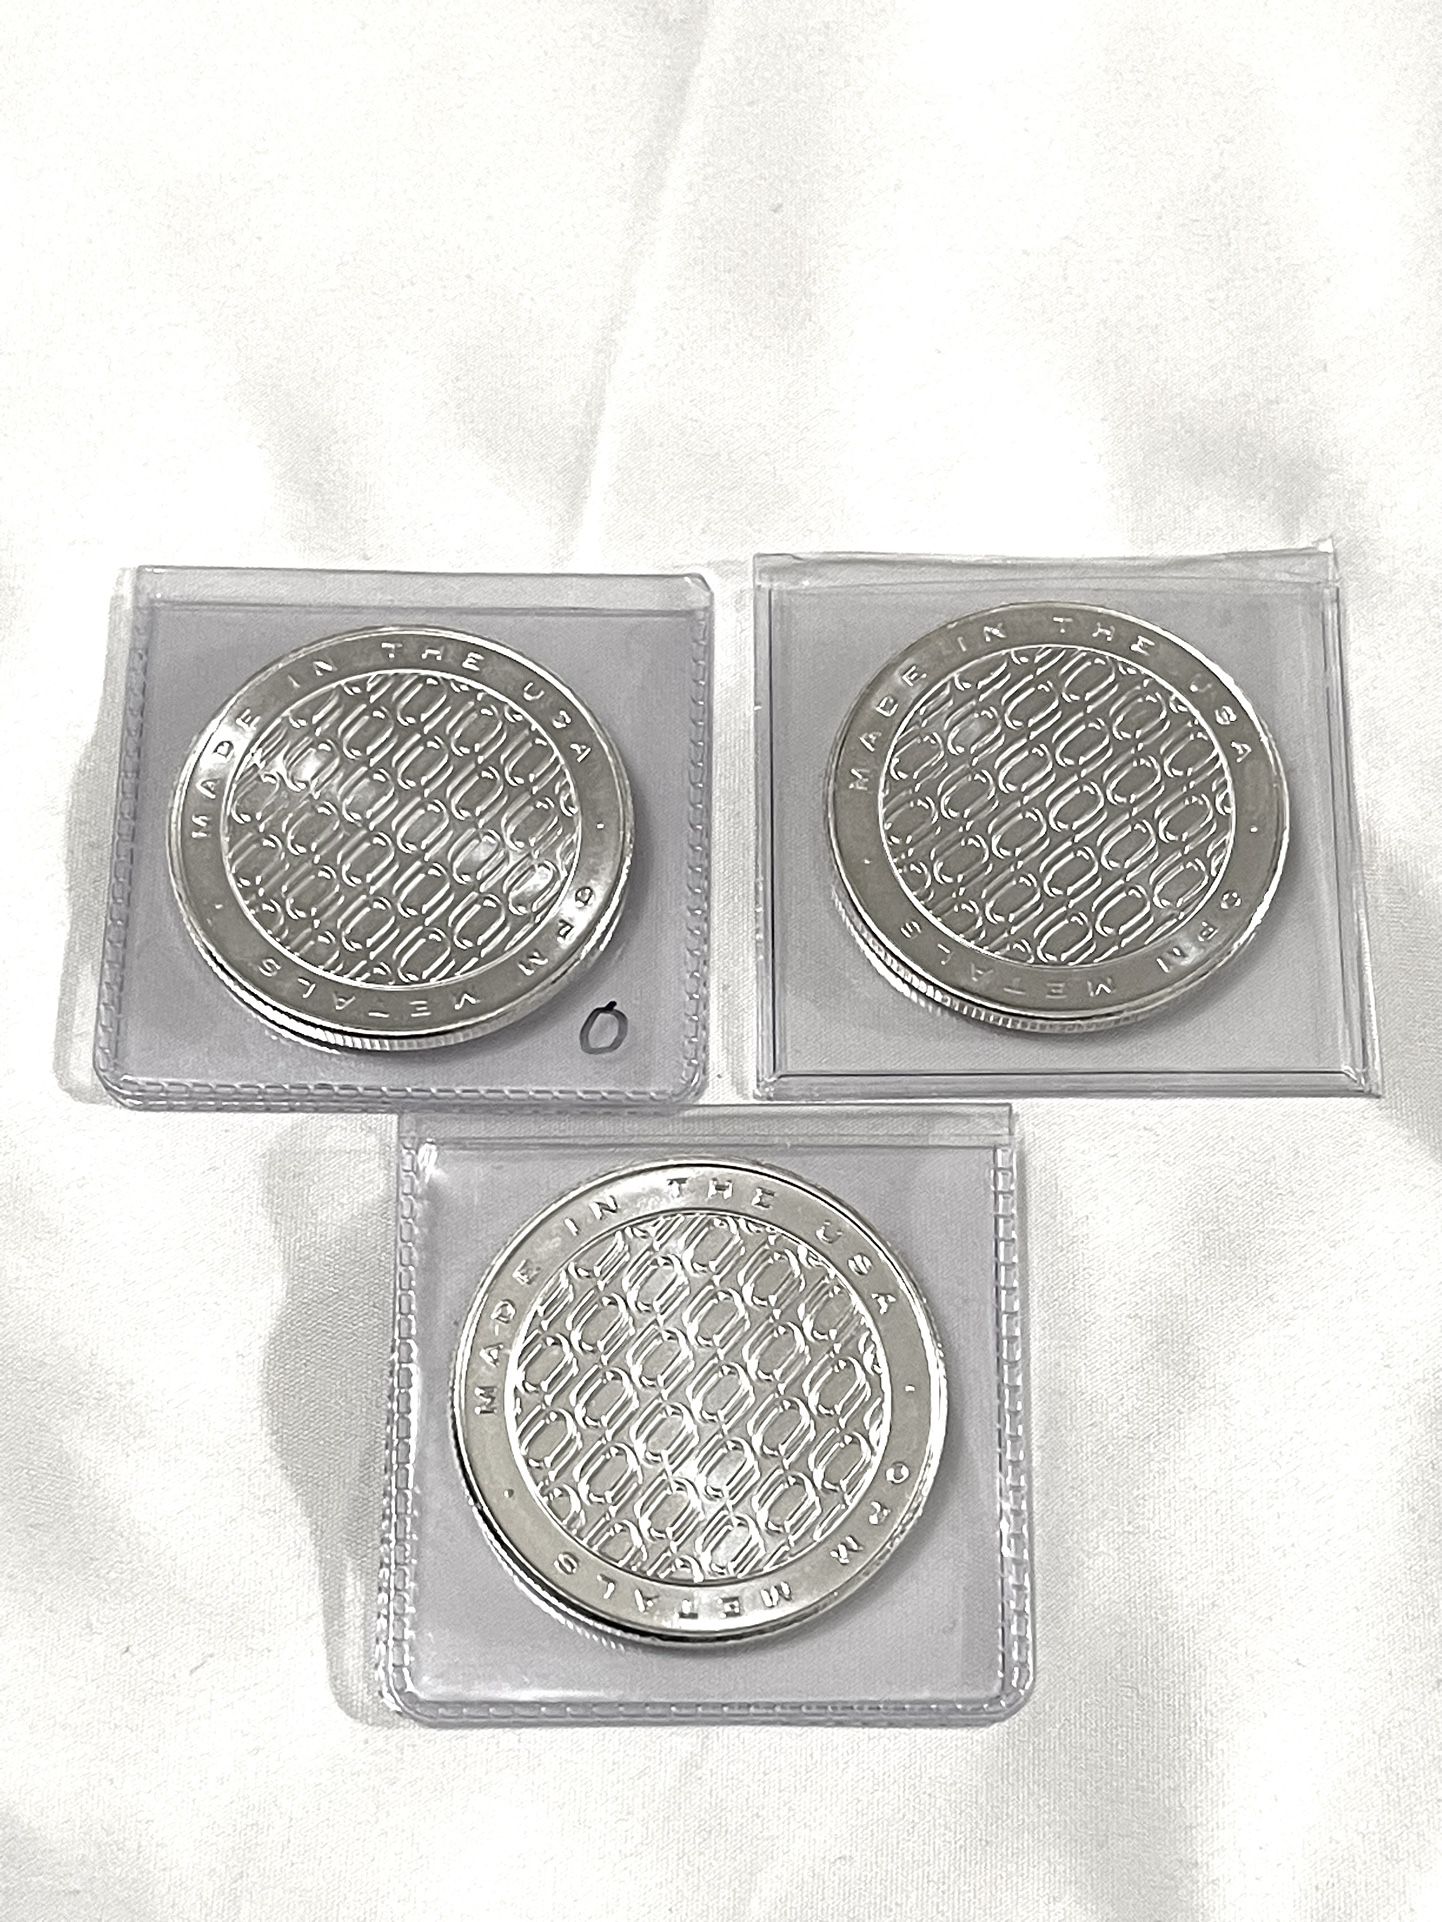 In Great Condition (3)  .999 Fine Silver 1 Troy Oz Each OPM Metals Silver Rounds 